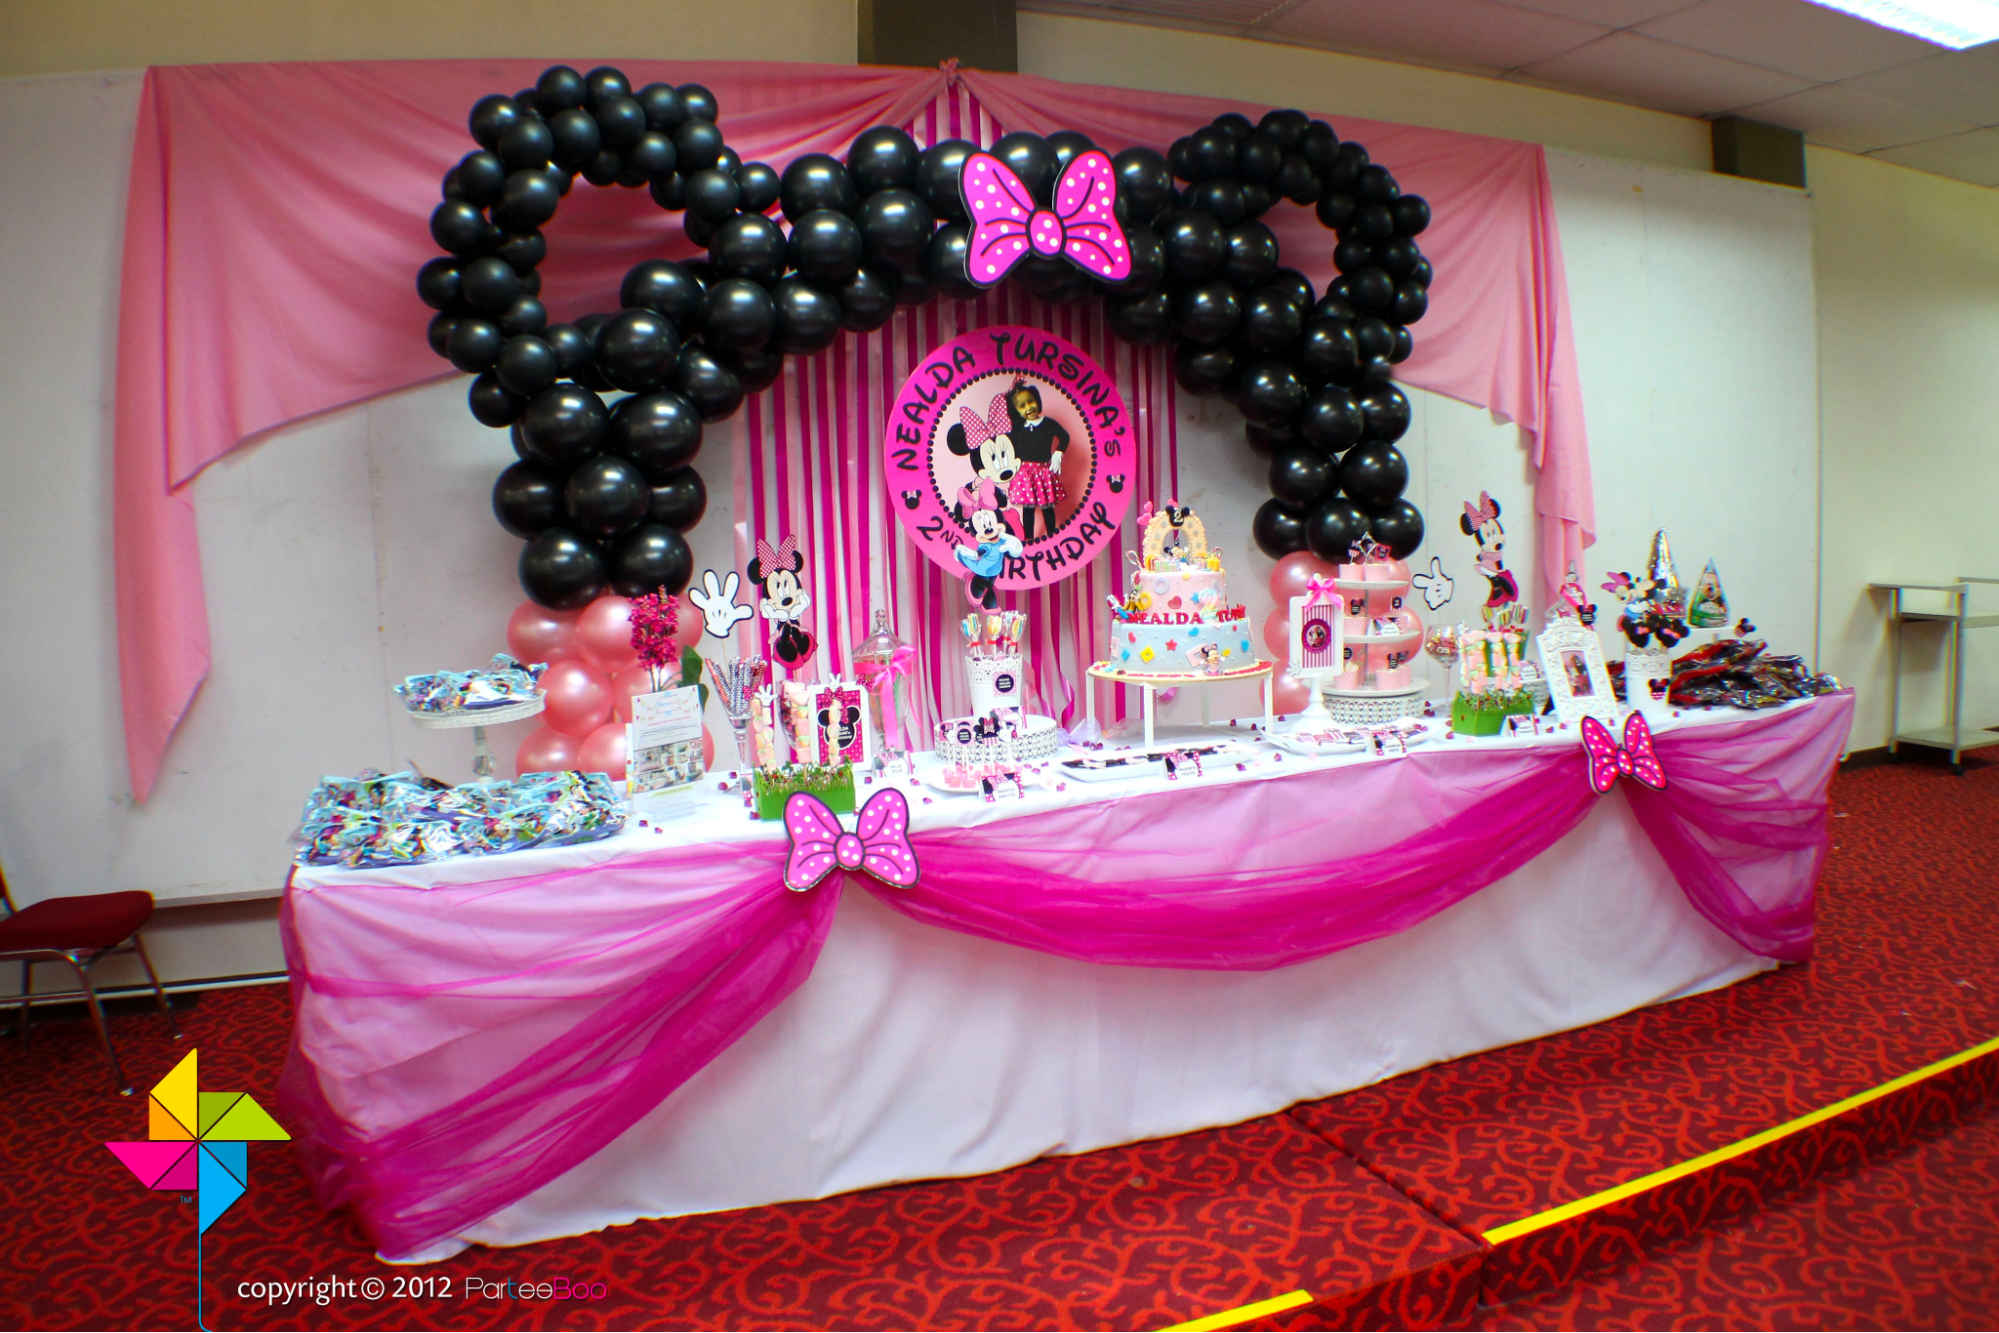 Minnie-mouse-themed birthday party backdrop decor